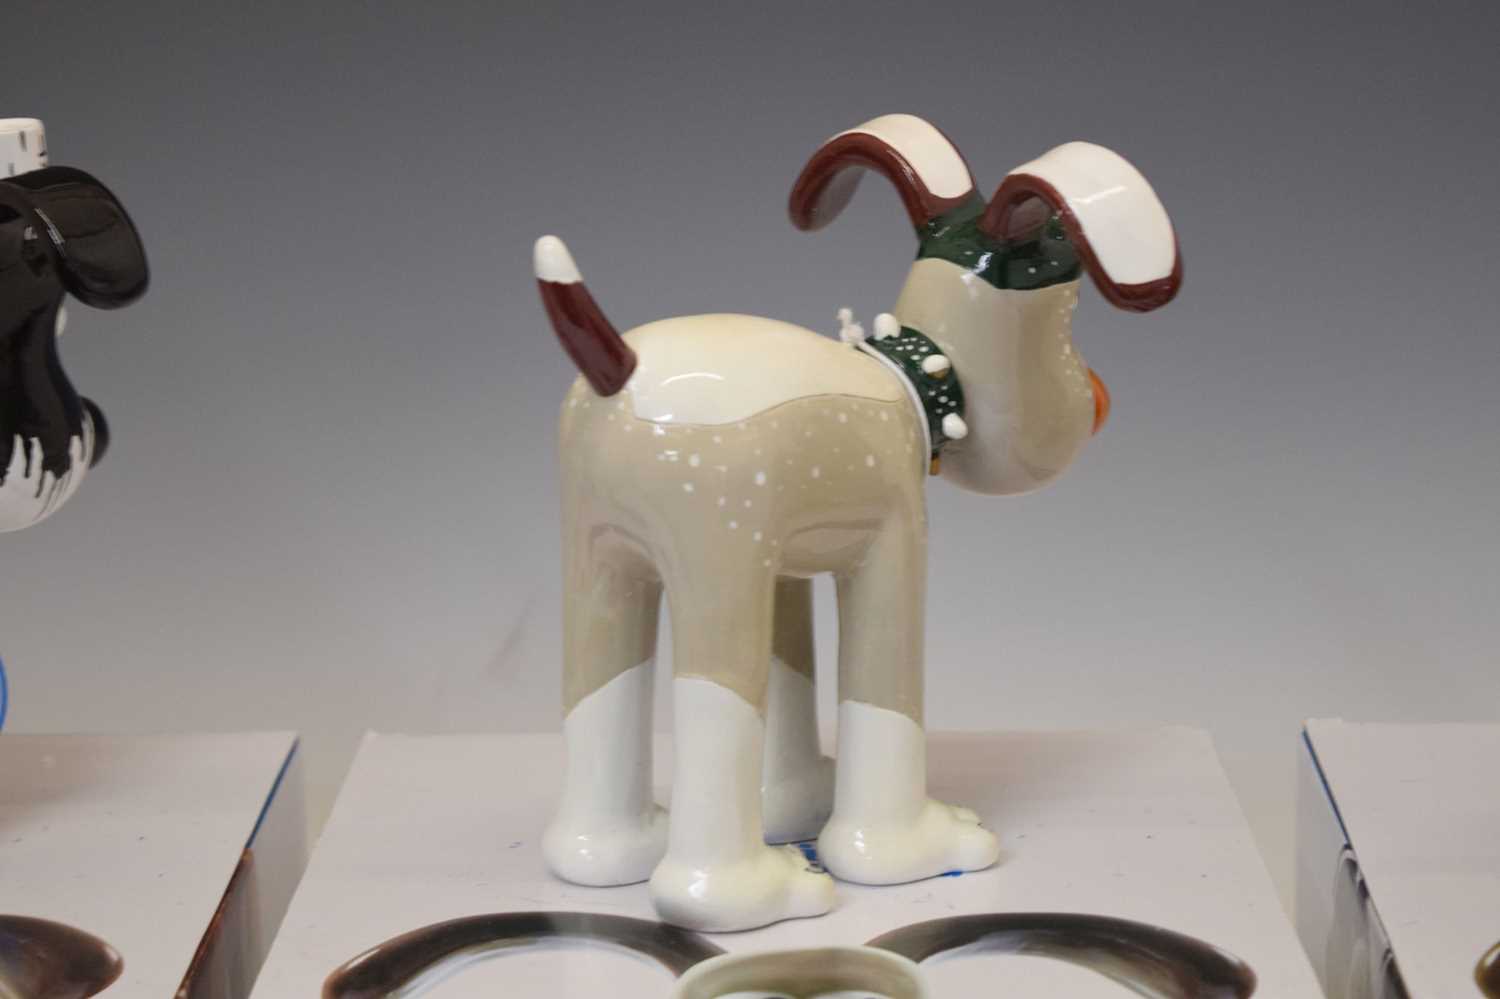 Aardman/Wallace and Gromit - 'Gromit Unleashed' figures - Image 6 of 11